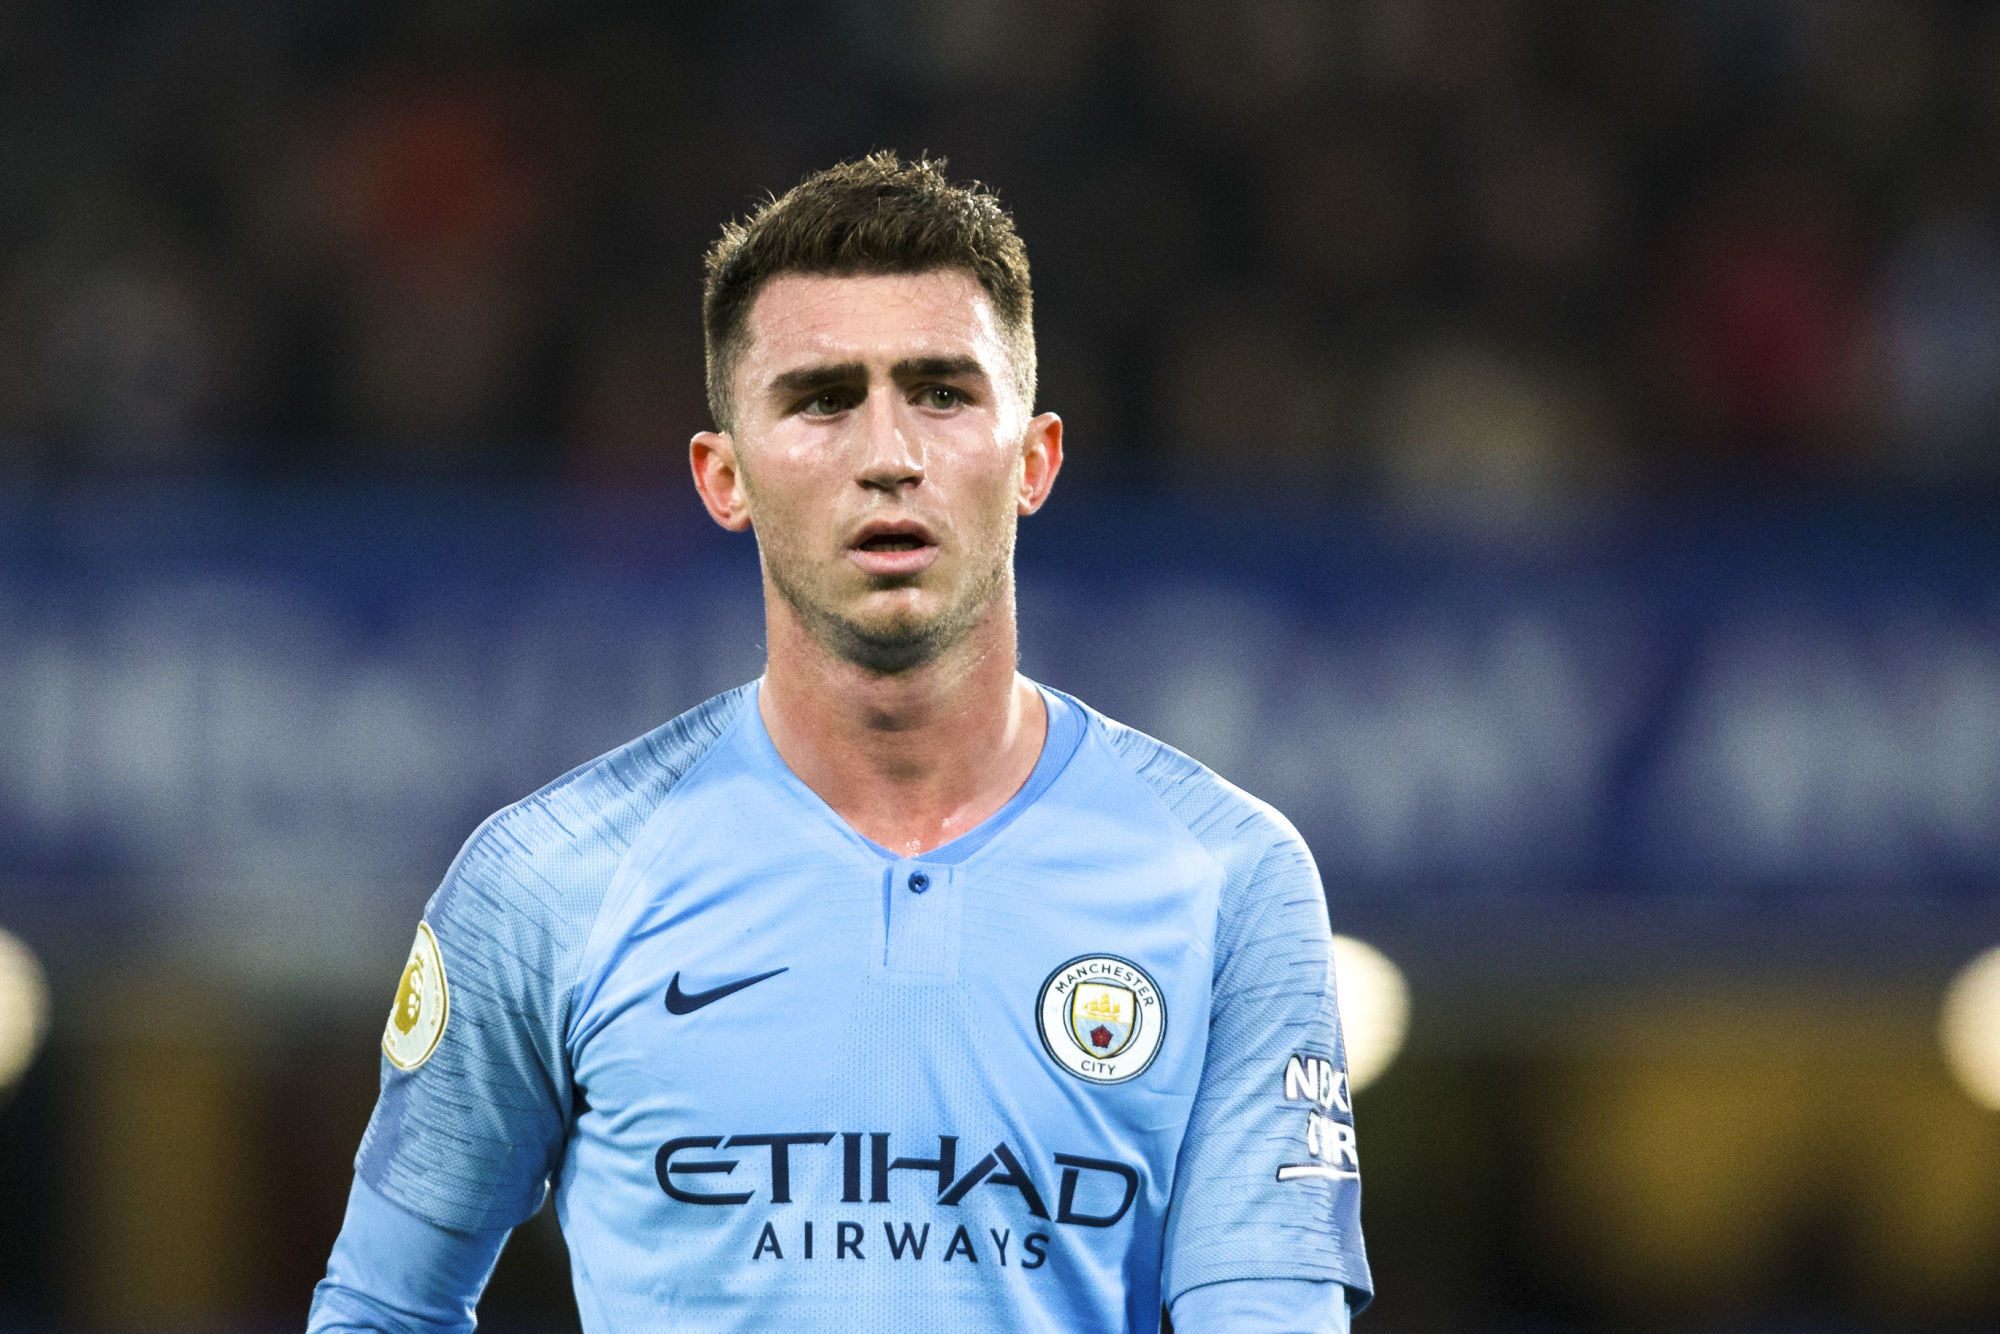 Aymeric Laporte of Manchester City during the Premier League match at Stamford Bridge Stadium, London. Picture date: 8th December 2018. Photo : Spi / Icon Sport